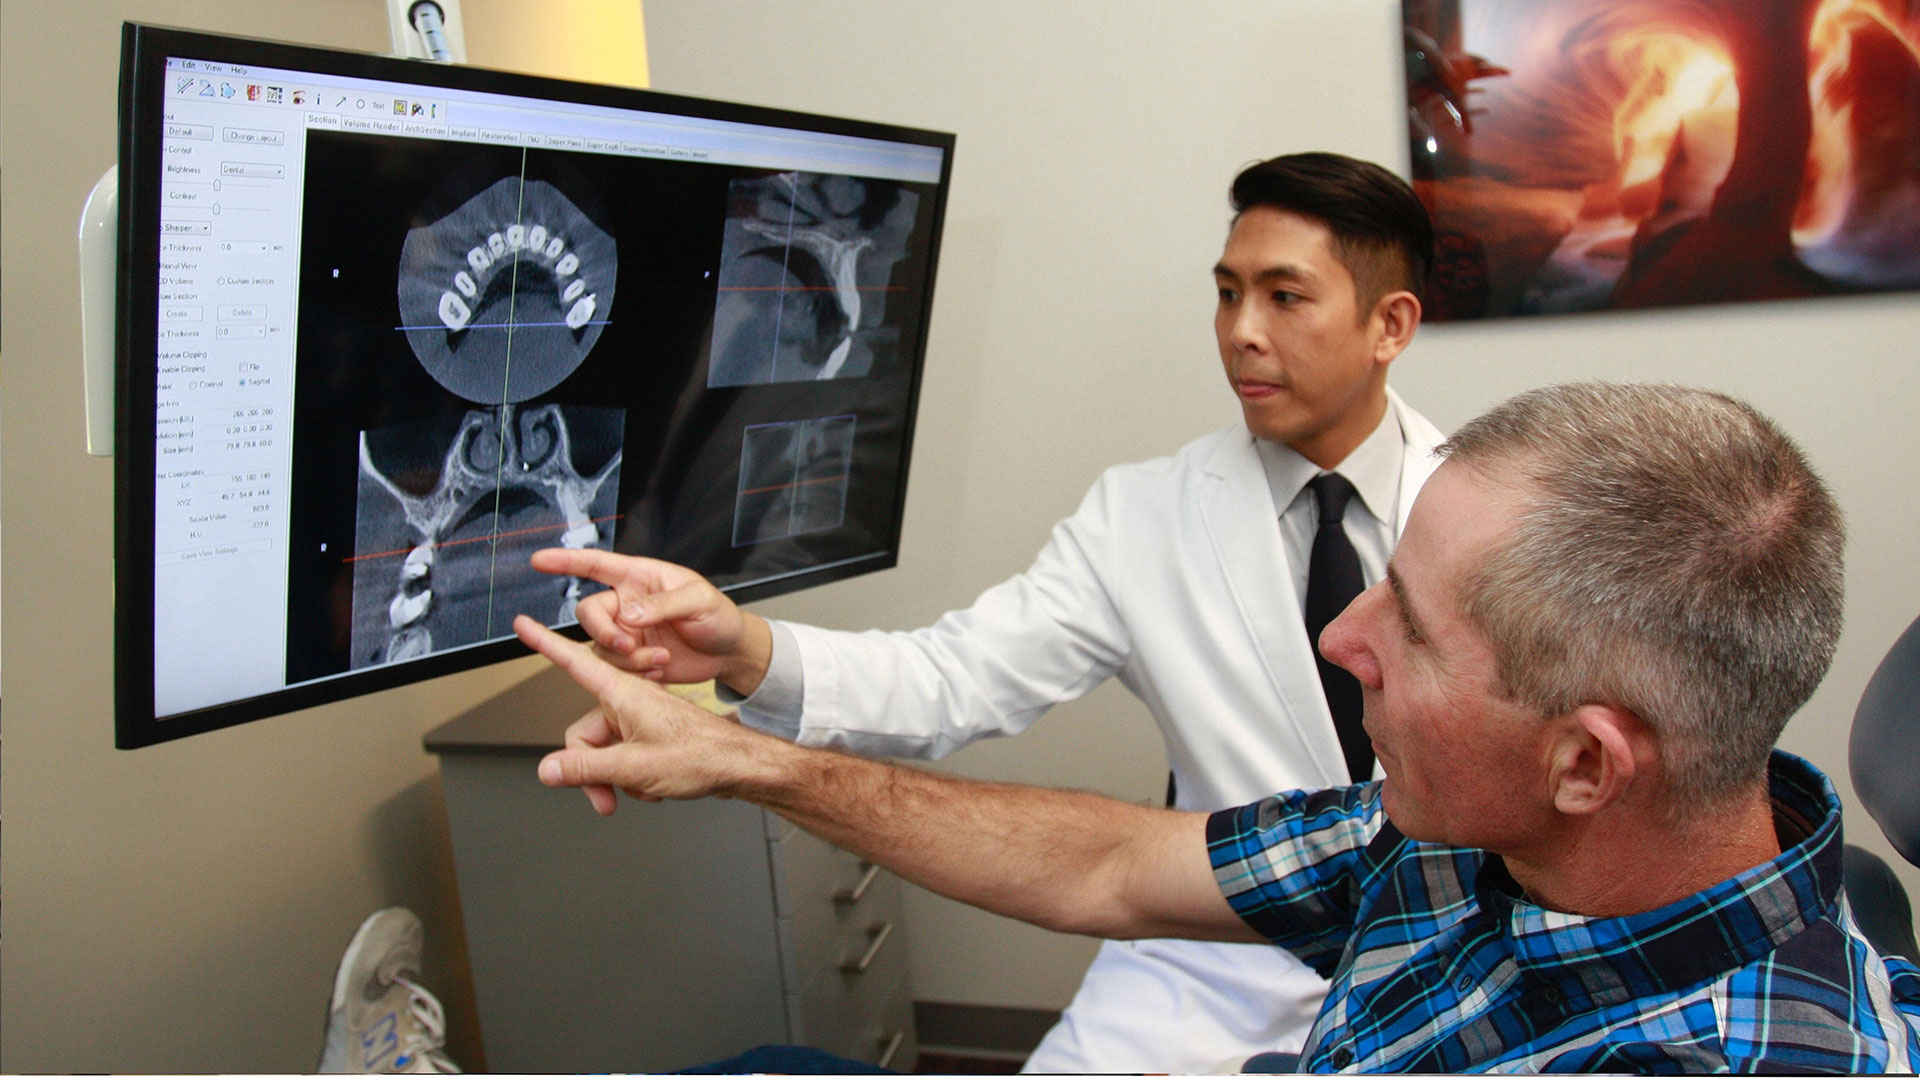 A medical professional is presenting a 3D model of a human body to a patient, with the patient pointing at a specific area on the model.